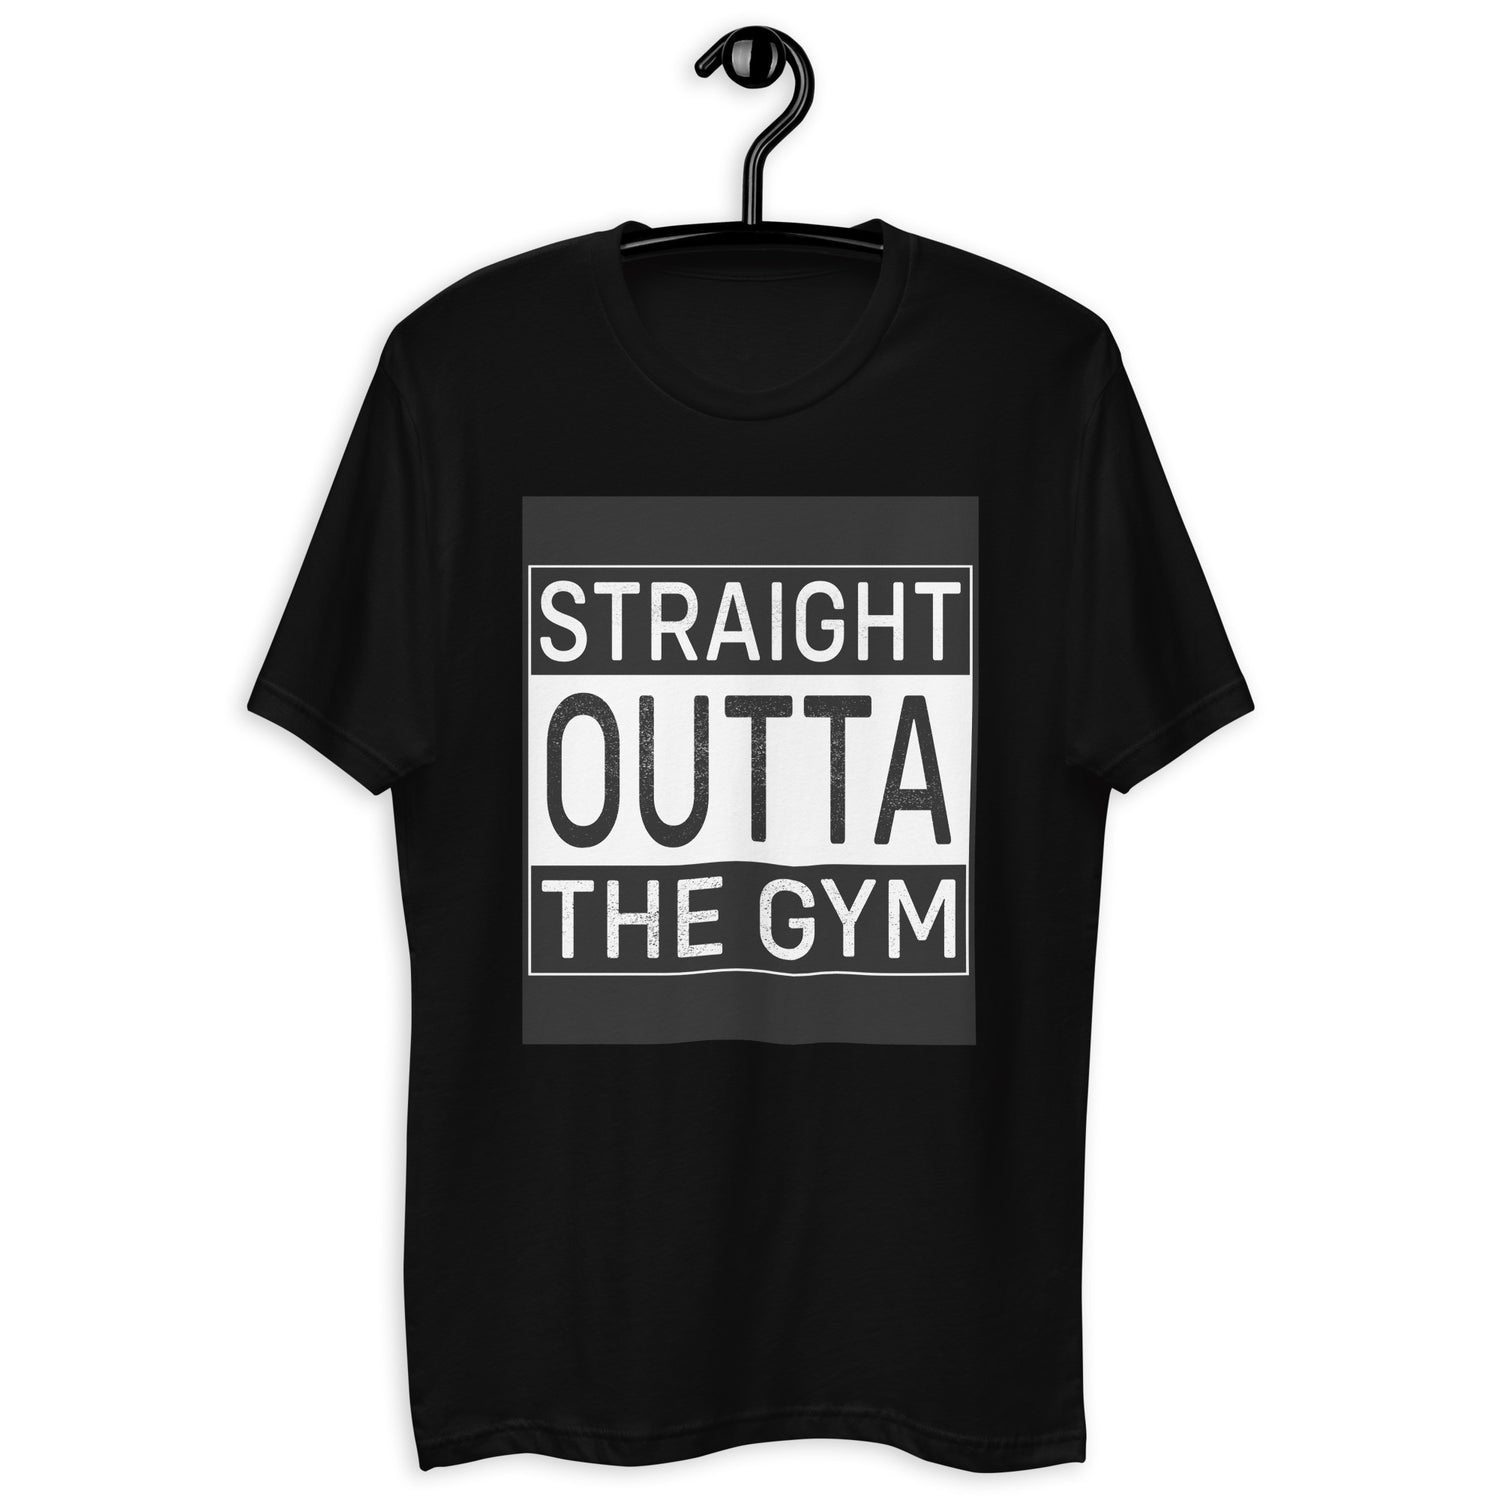 Sparkle-kiss-creations-straight-out-of-the-gym-t-shirt-black